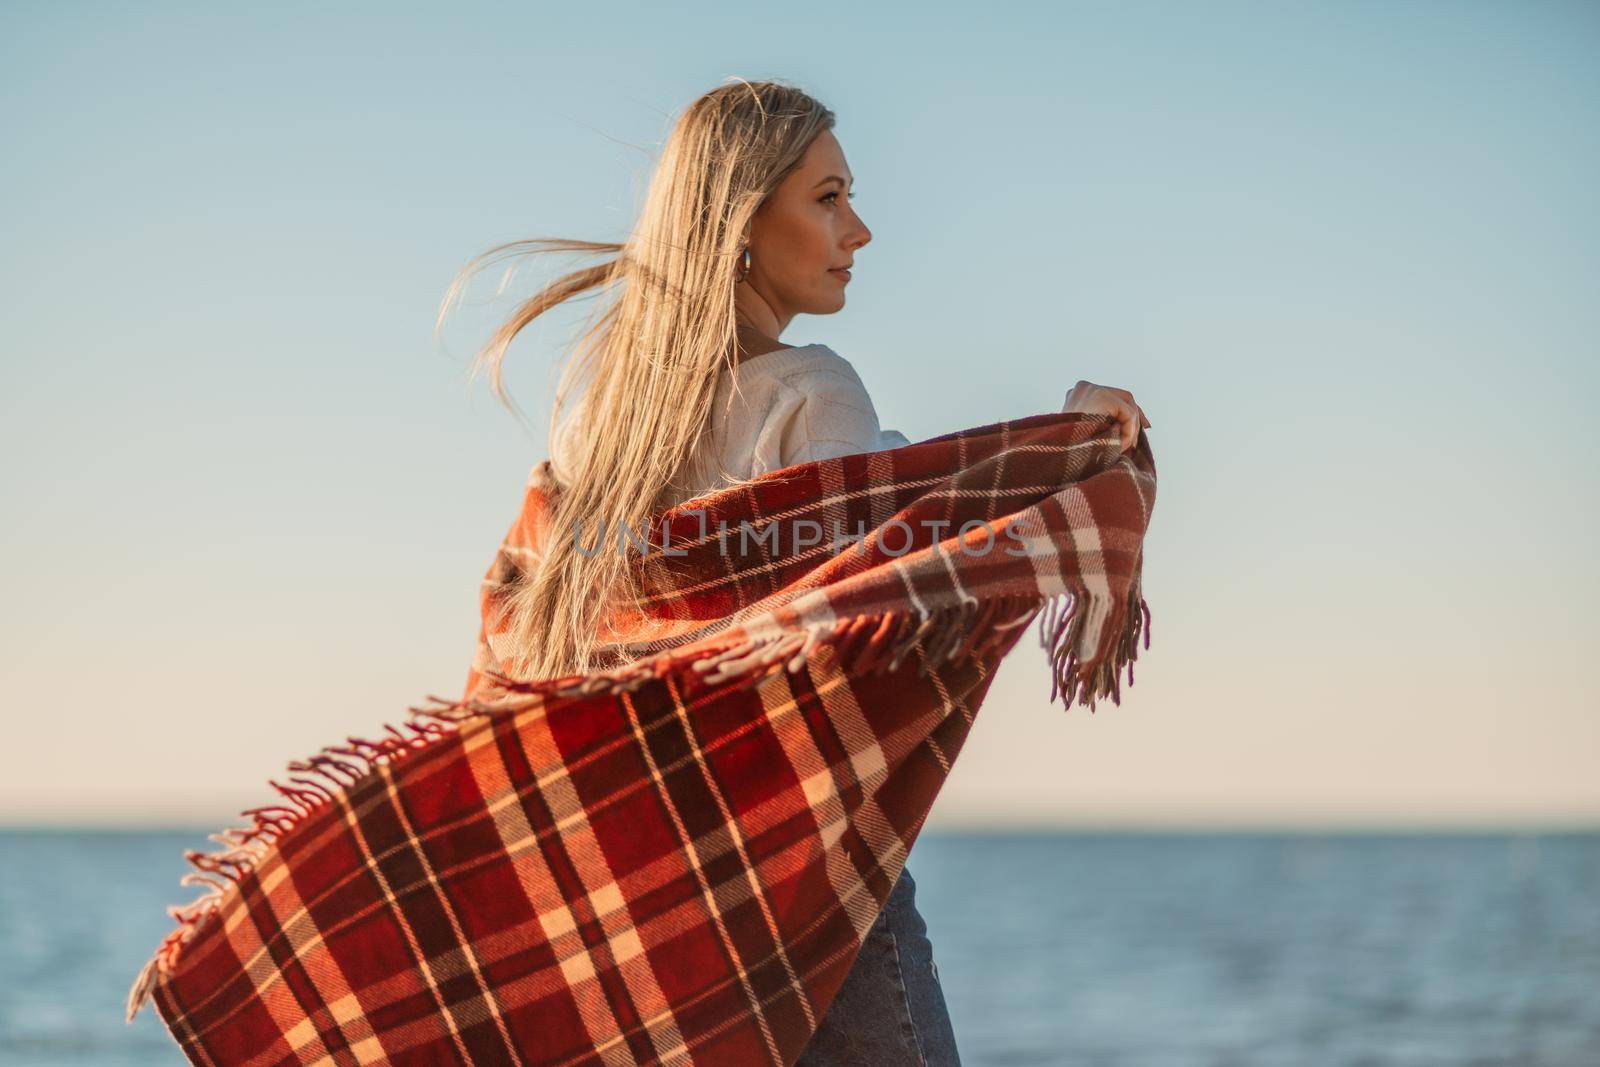 Attractive blonde Caucasian woman enjoying time on the beach at sunset, walking in a blanket and looking to the side, with the sunset sky and sea in the background. Beach vacation by Matiunina